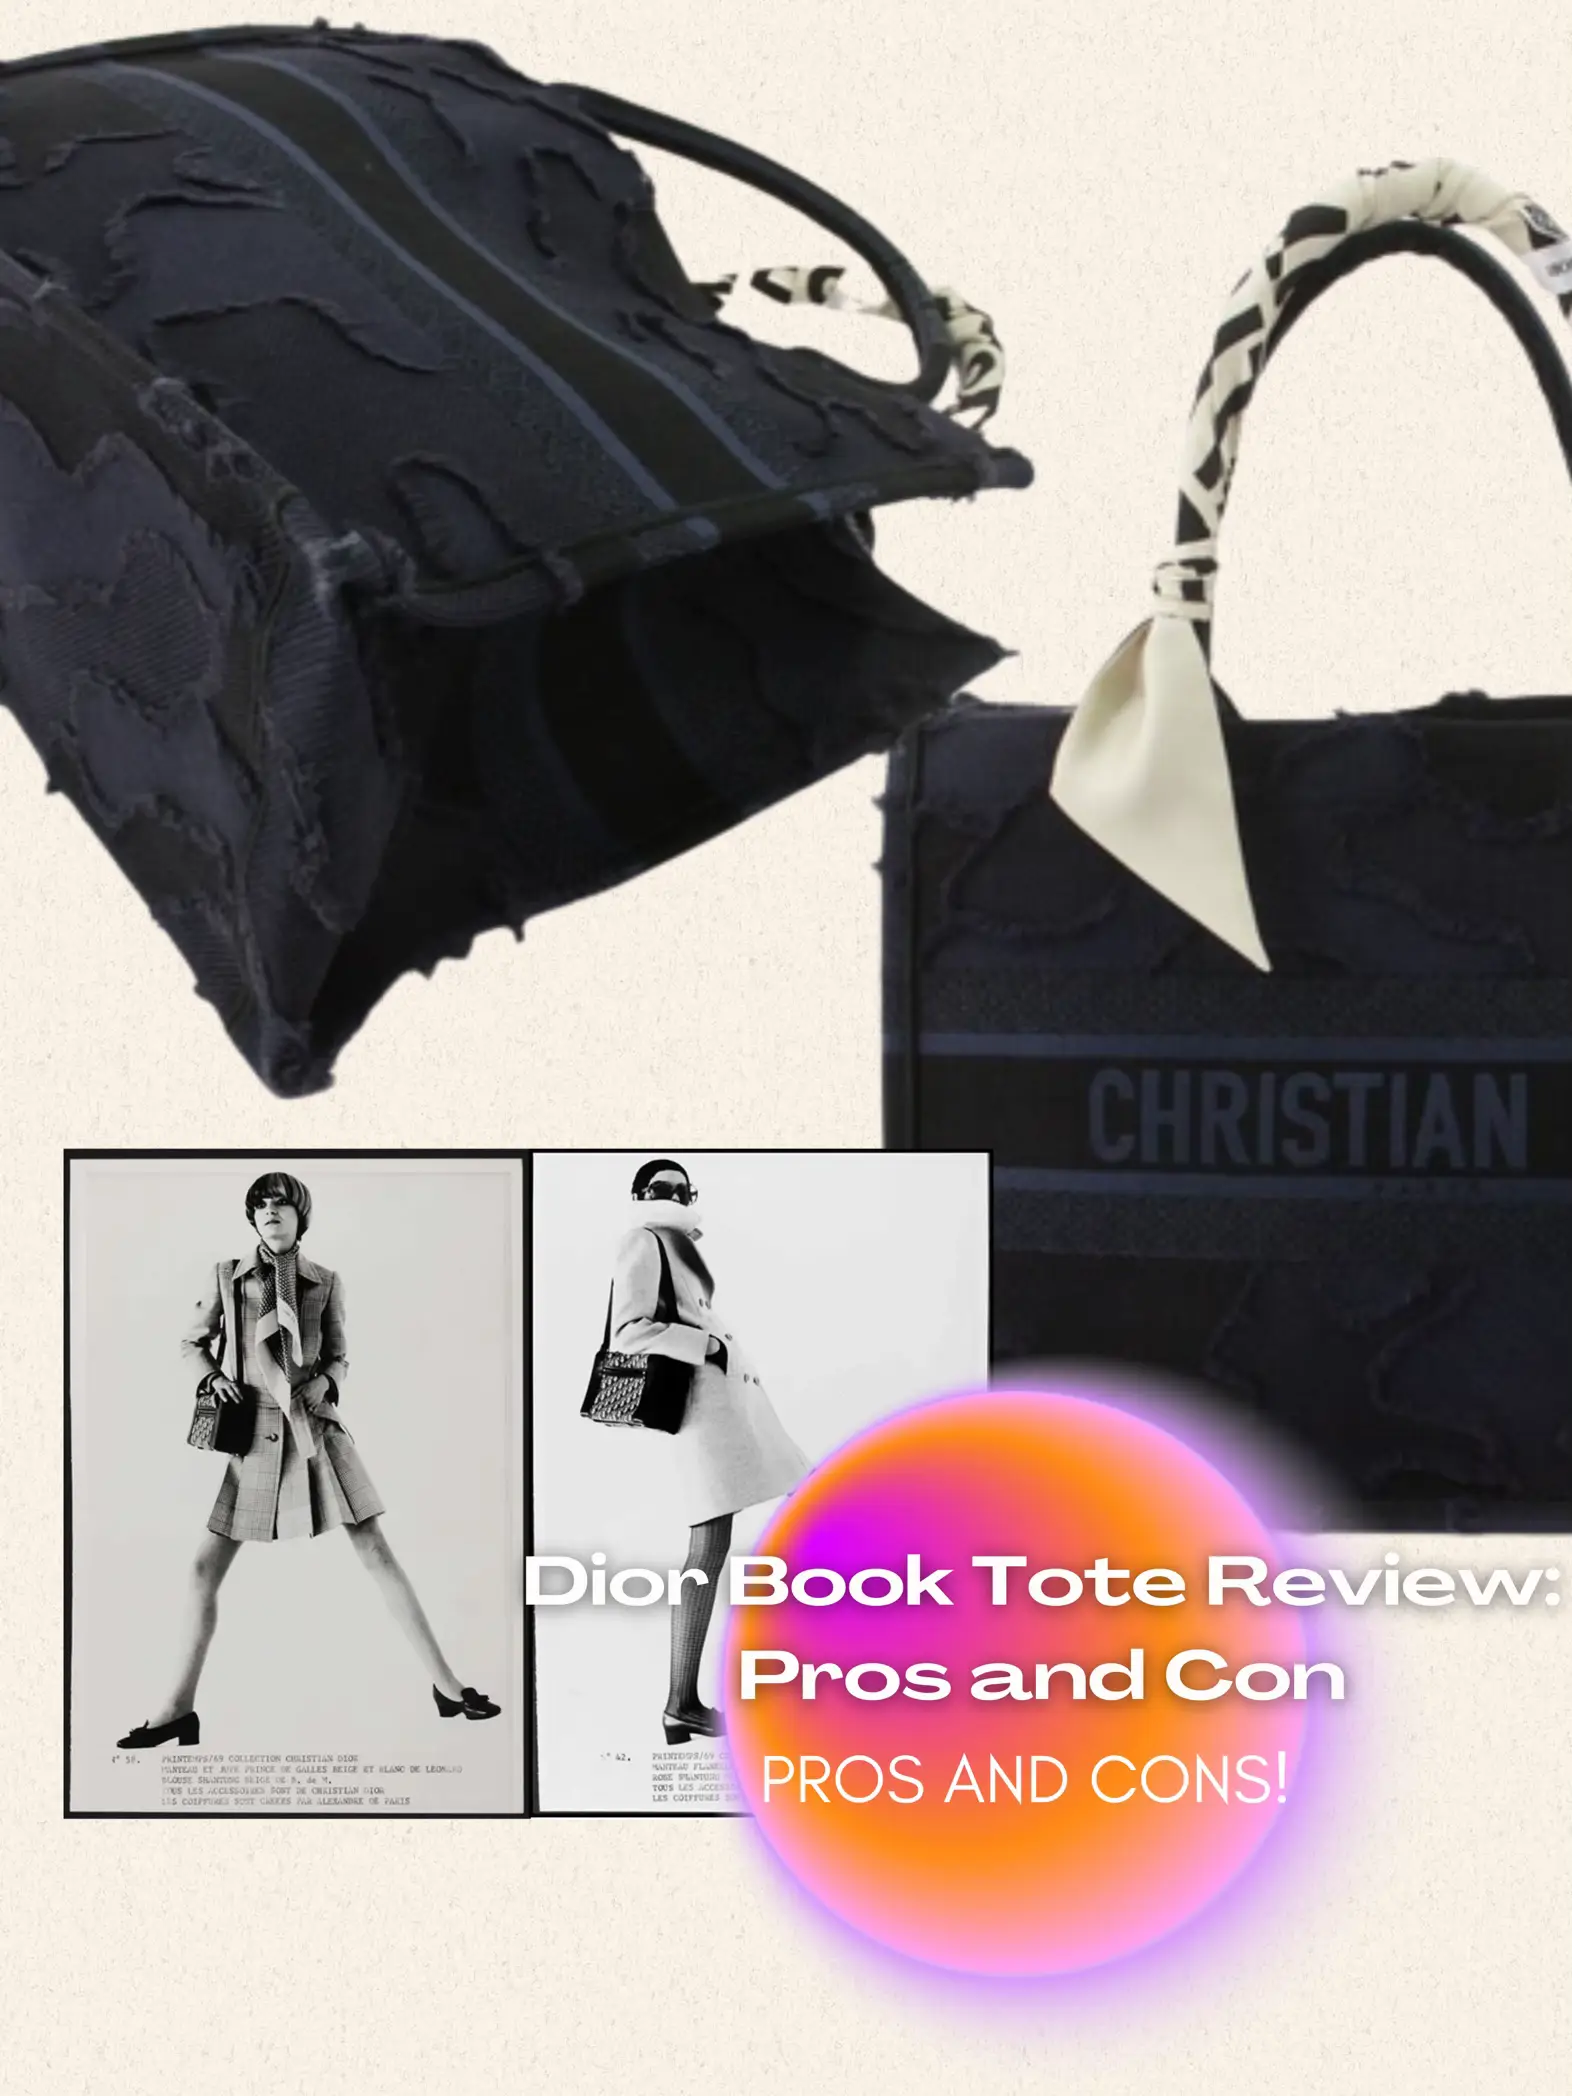 Dior Book Tote Review: Pros and Cons, Gallery posted by Natasshanjani